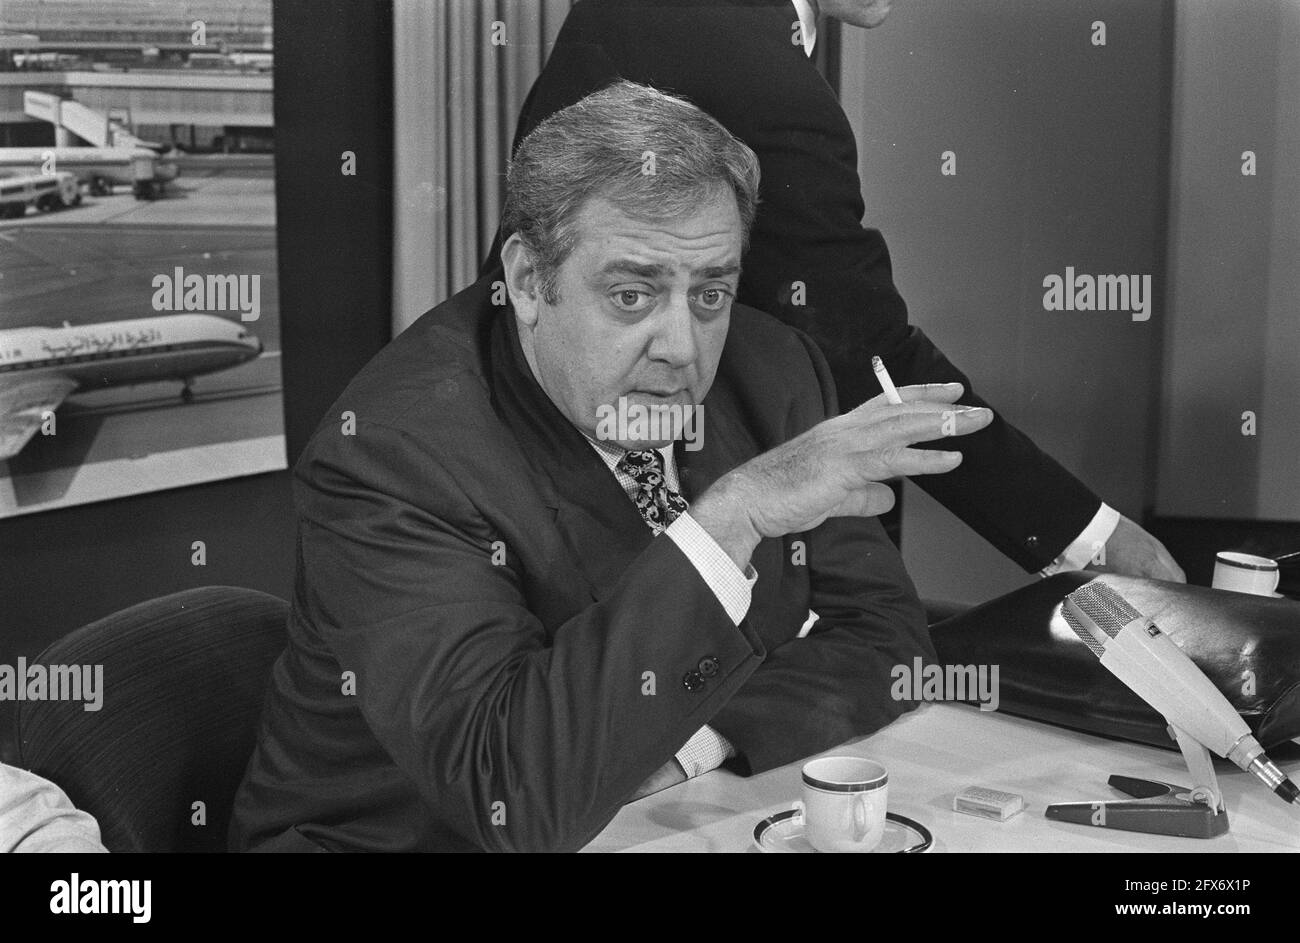 Actors Raymond Burr and ex-Tarzan Johnny Weismuller (USA) arrive at Schiphol Airport; right Burr, head on, June 24, 1970, ACTORS, actors, The Netherlands, 20th century press agency photo, news to remember, documentary, historic photography 1945-1990, visual stories, human history of the Twentieth Century, capturing moments in time Stock Photo